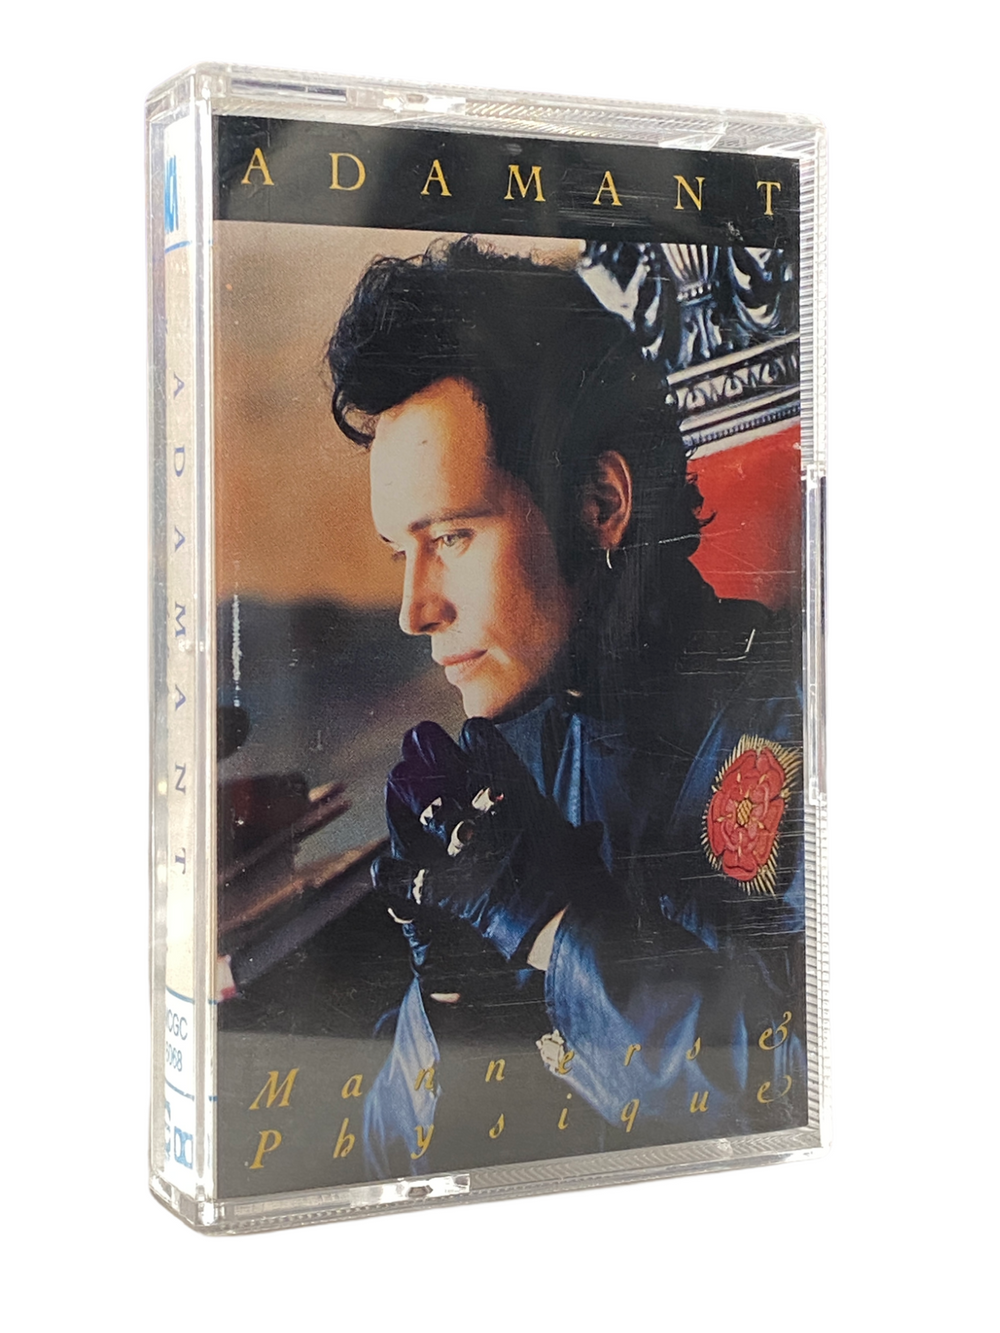 Prince – Adam Ant Manners & Physique Original Cassette Tape UK 1989 Release Prince